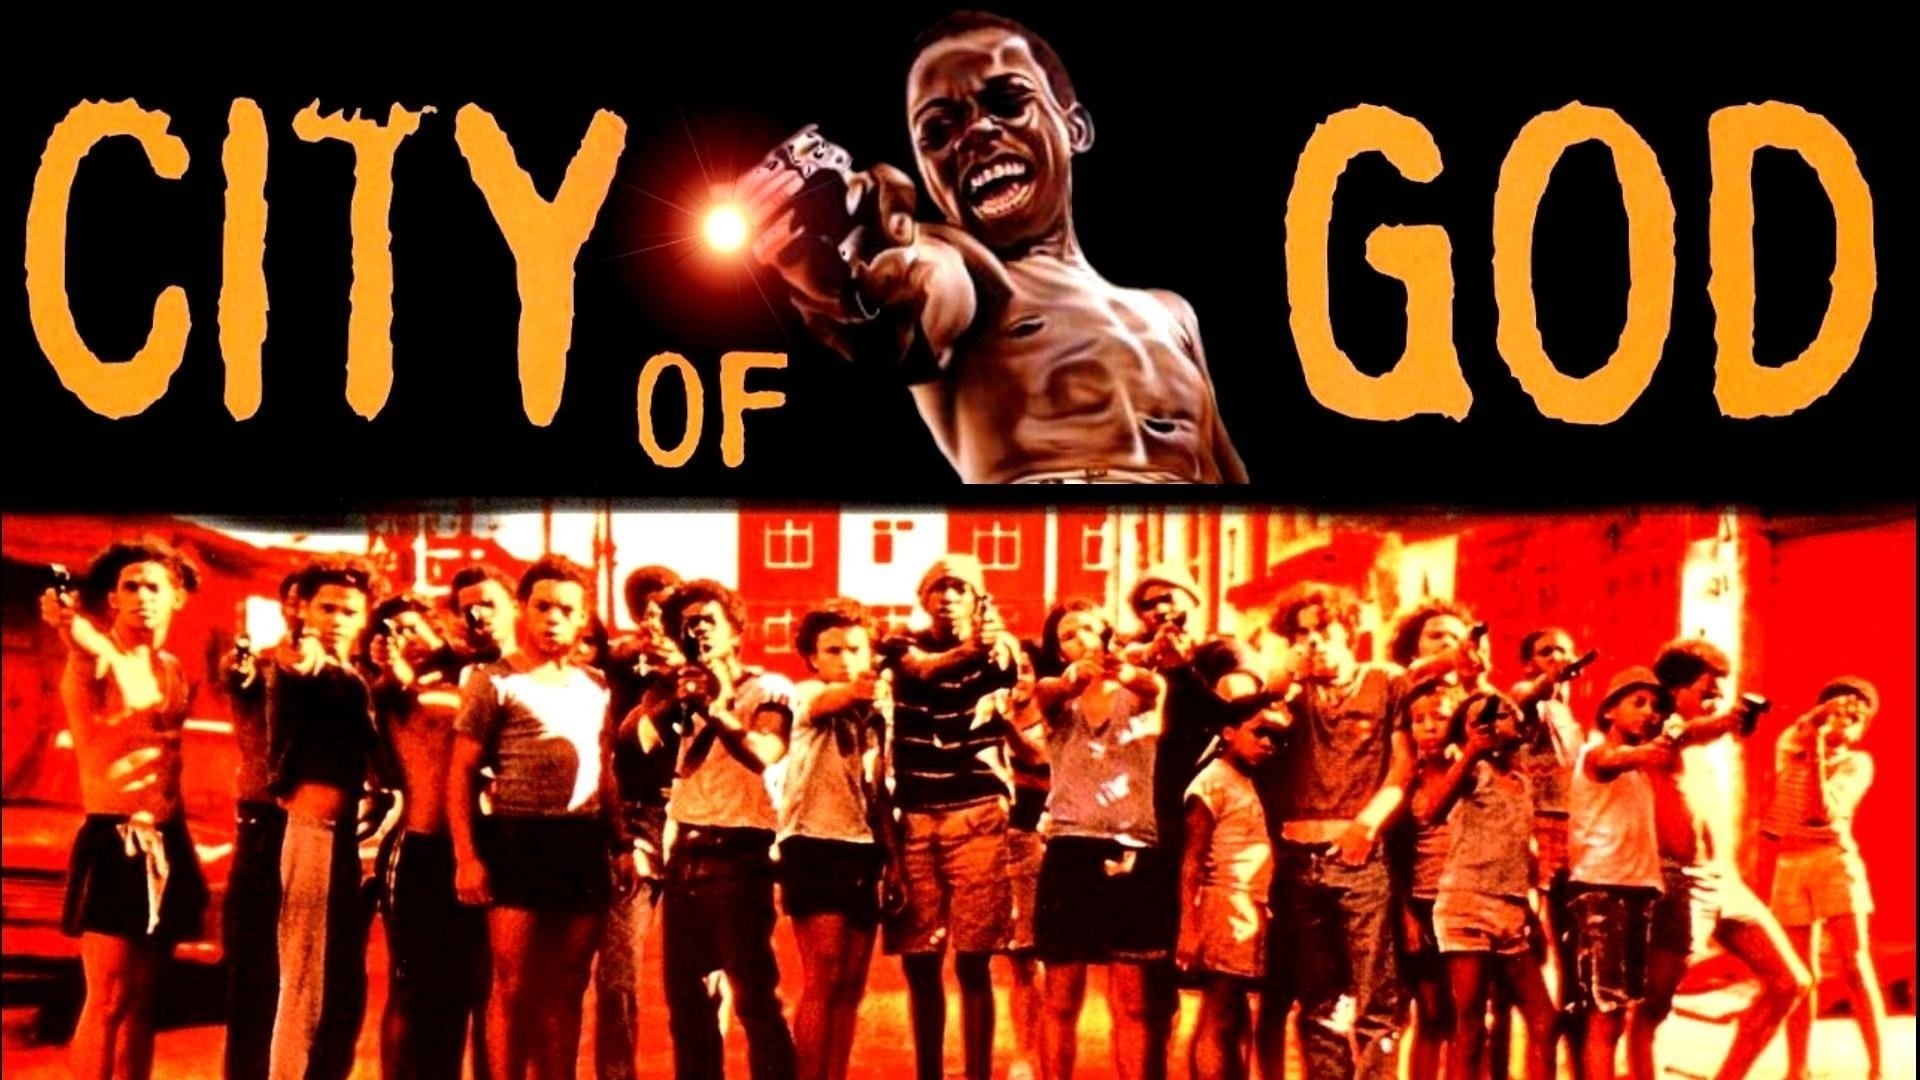 City Of God Wallpapers - City Of God Hd , HD Wallpaper & Backgrounds